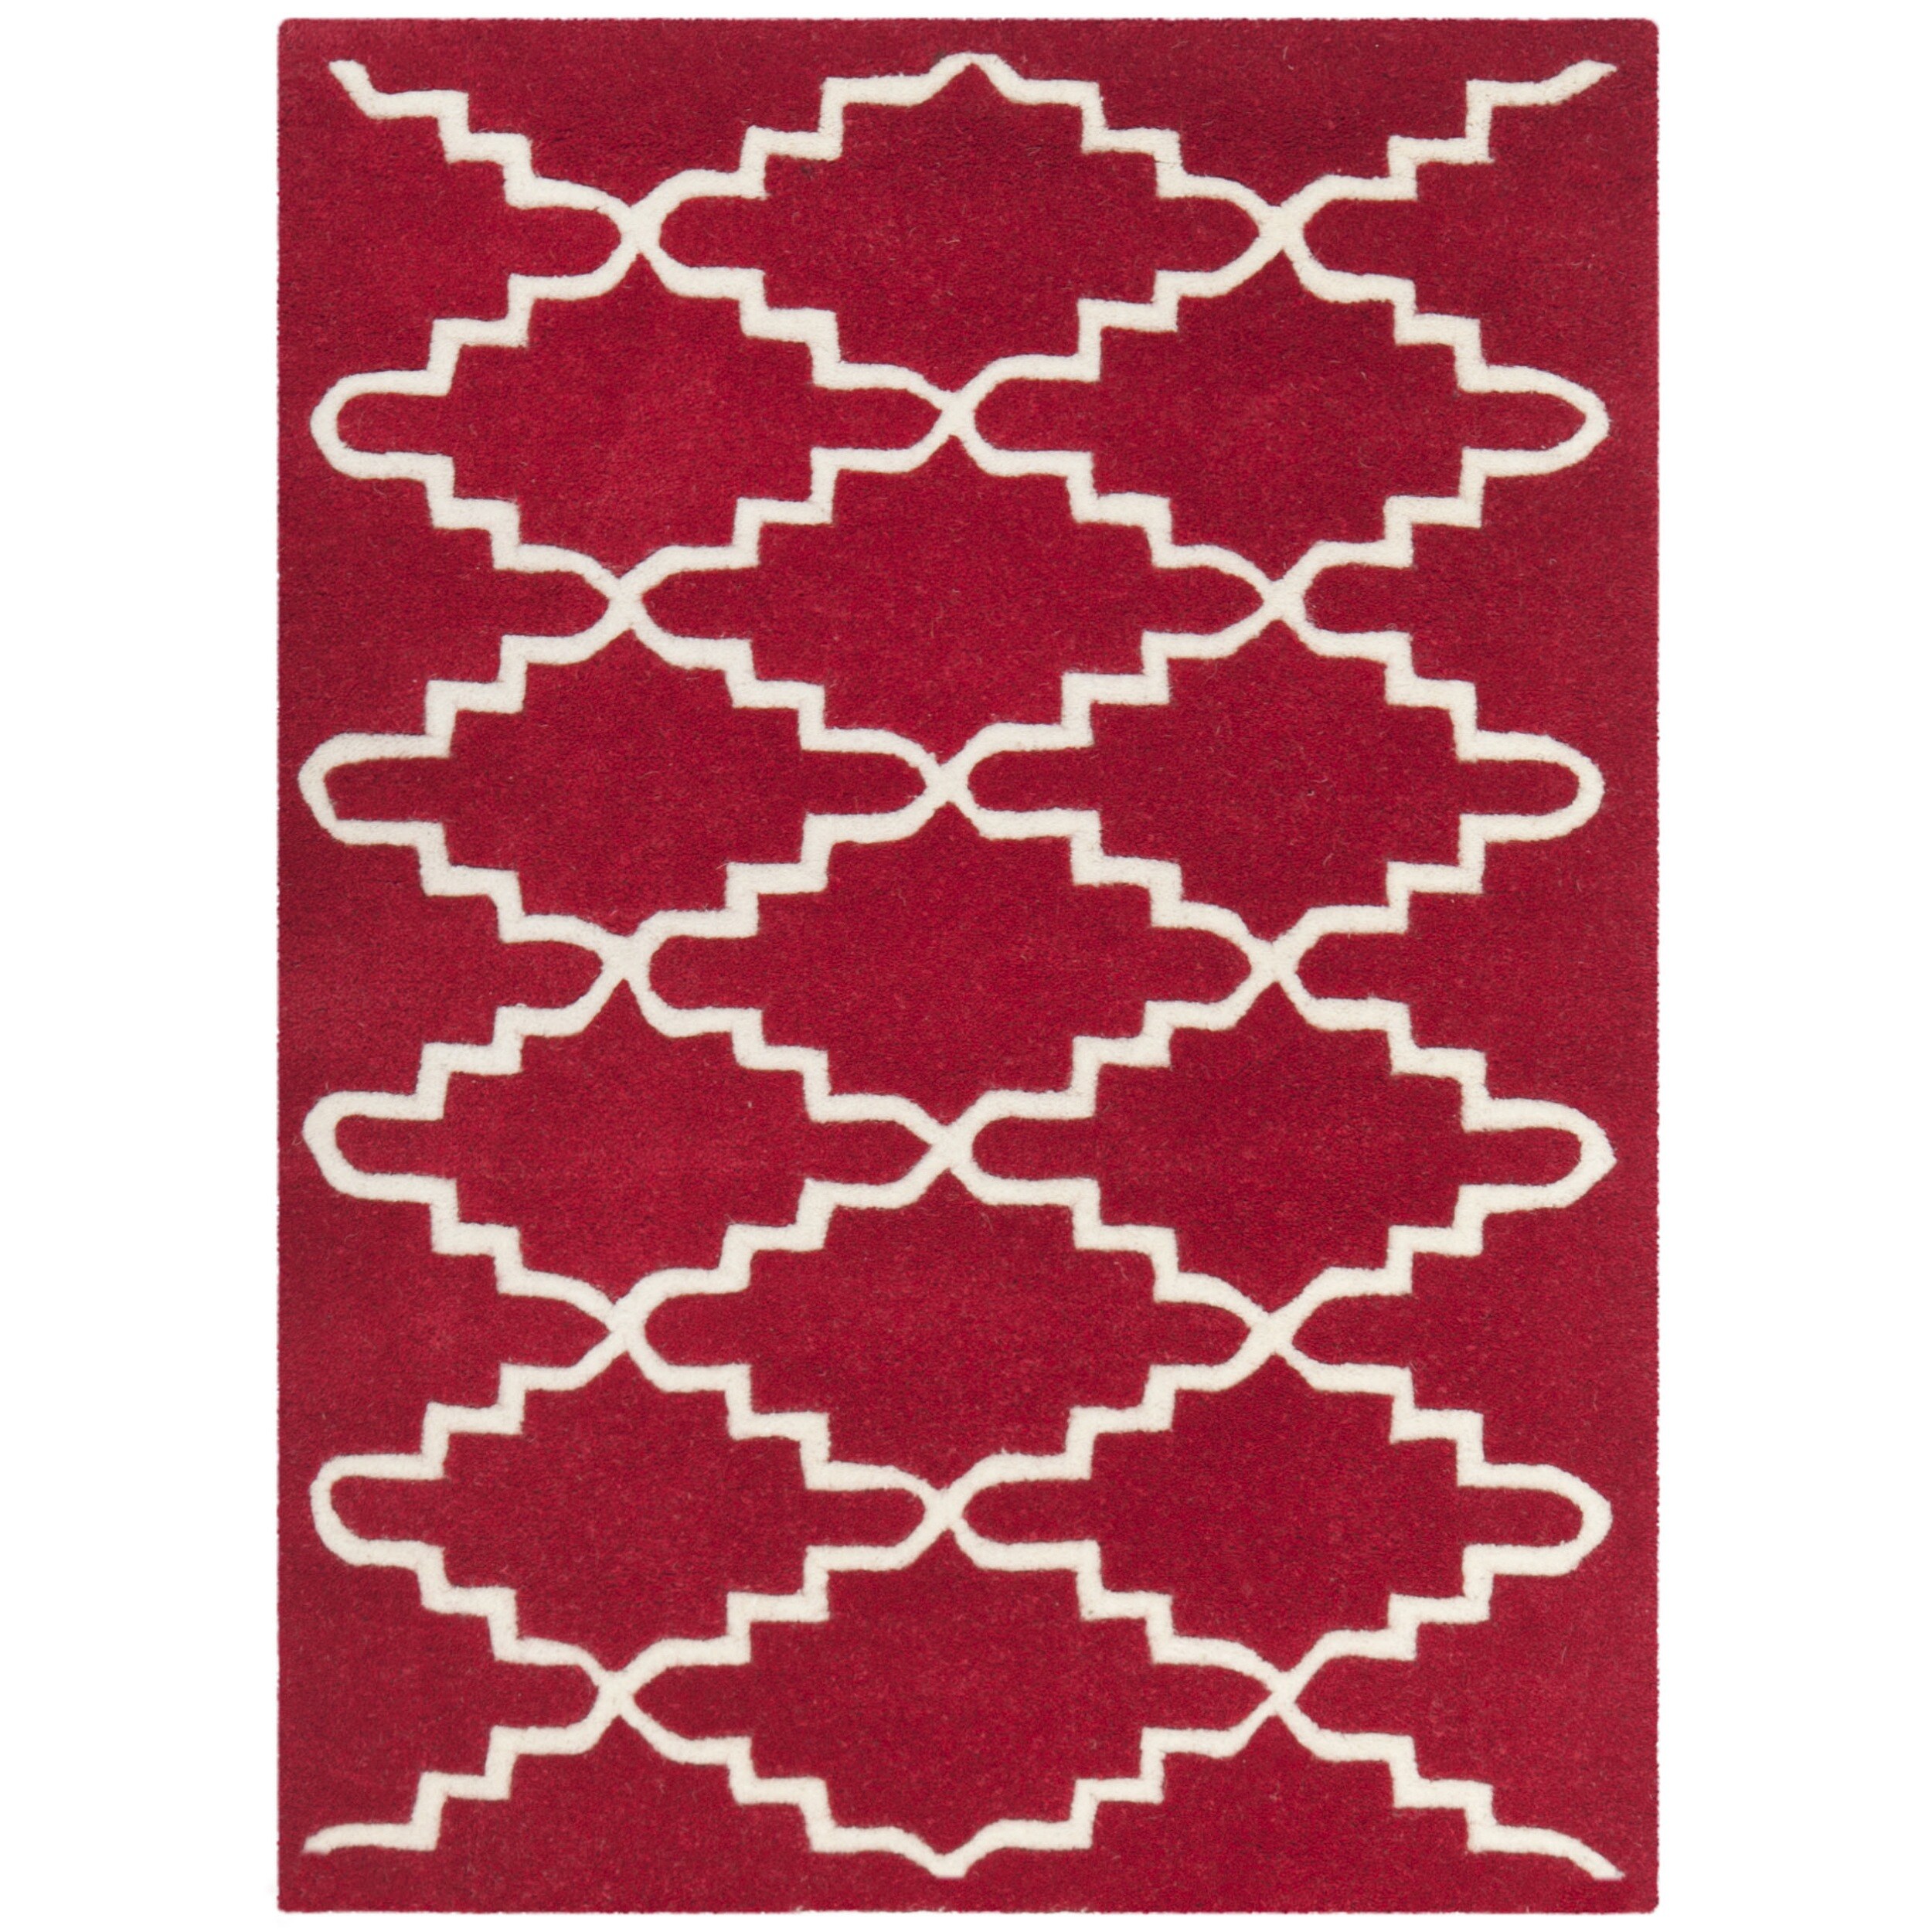 Handmade Moroccan Red Cotton canvas Wool Rug (2 X 3)